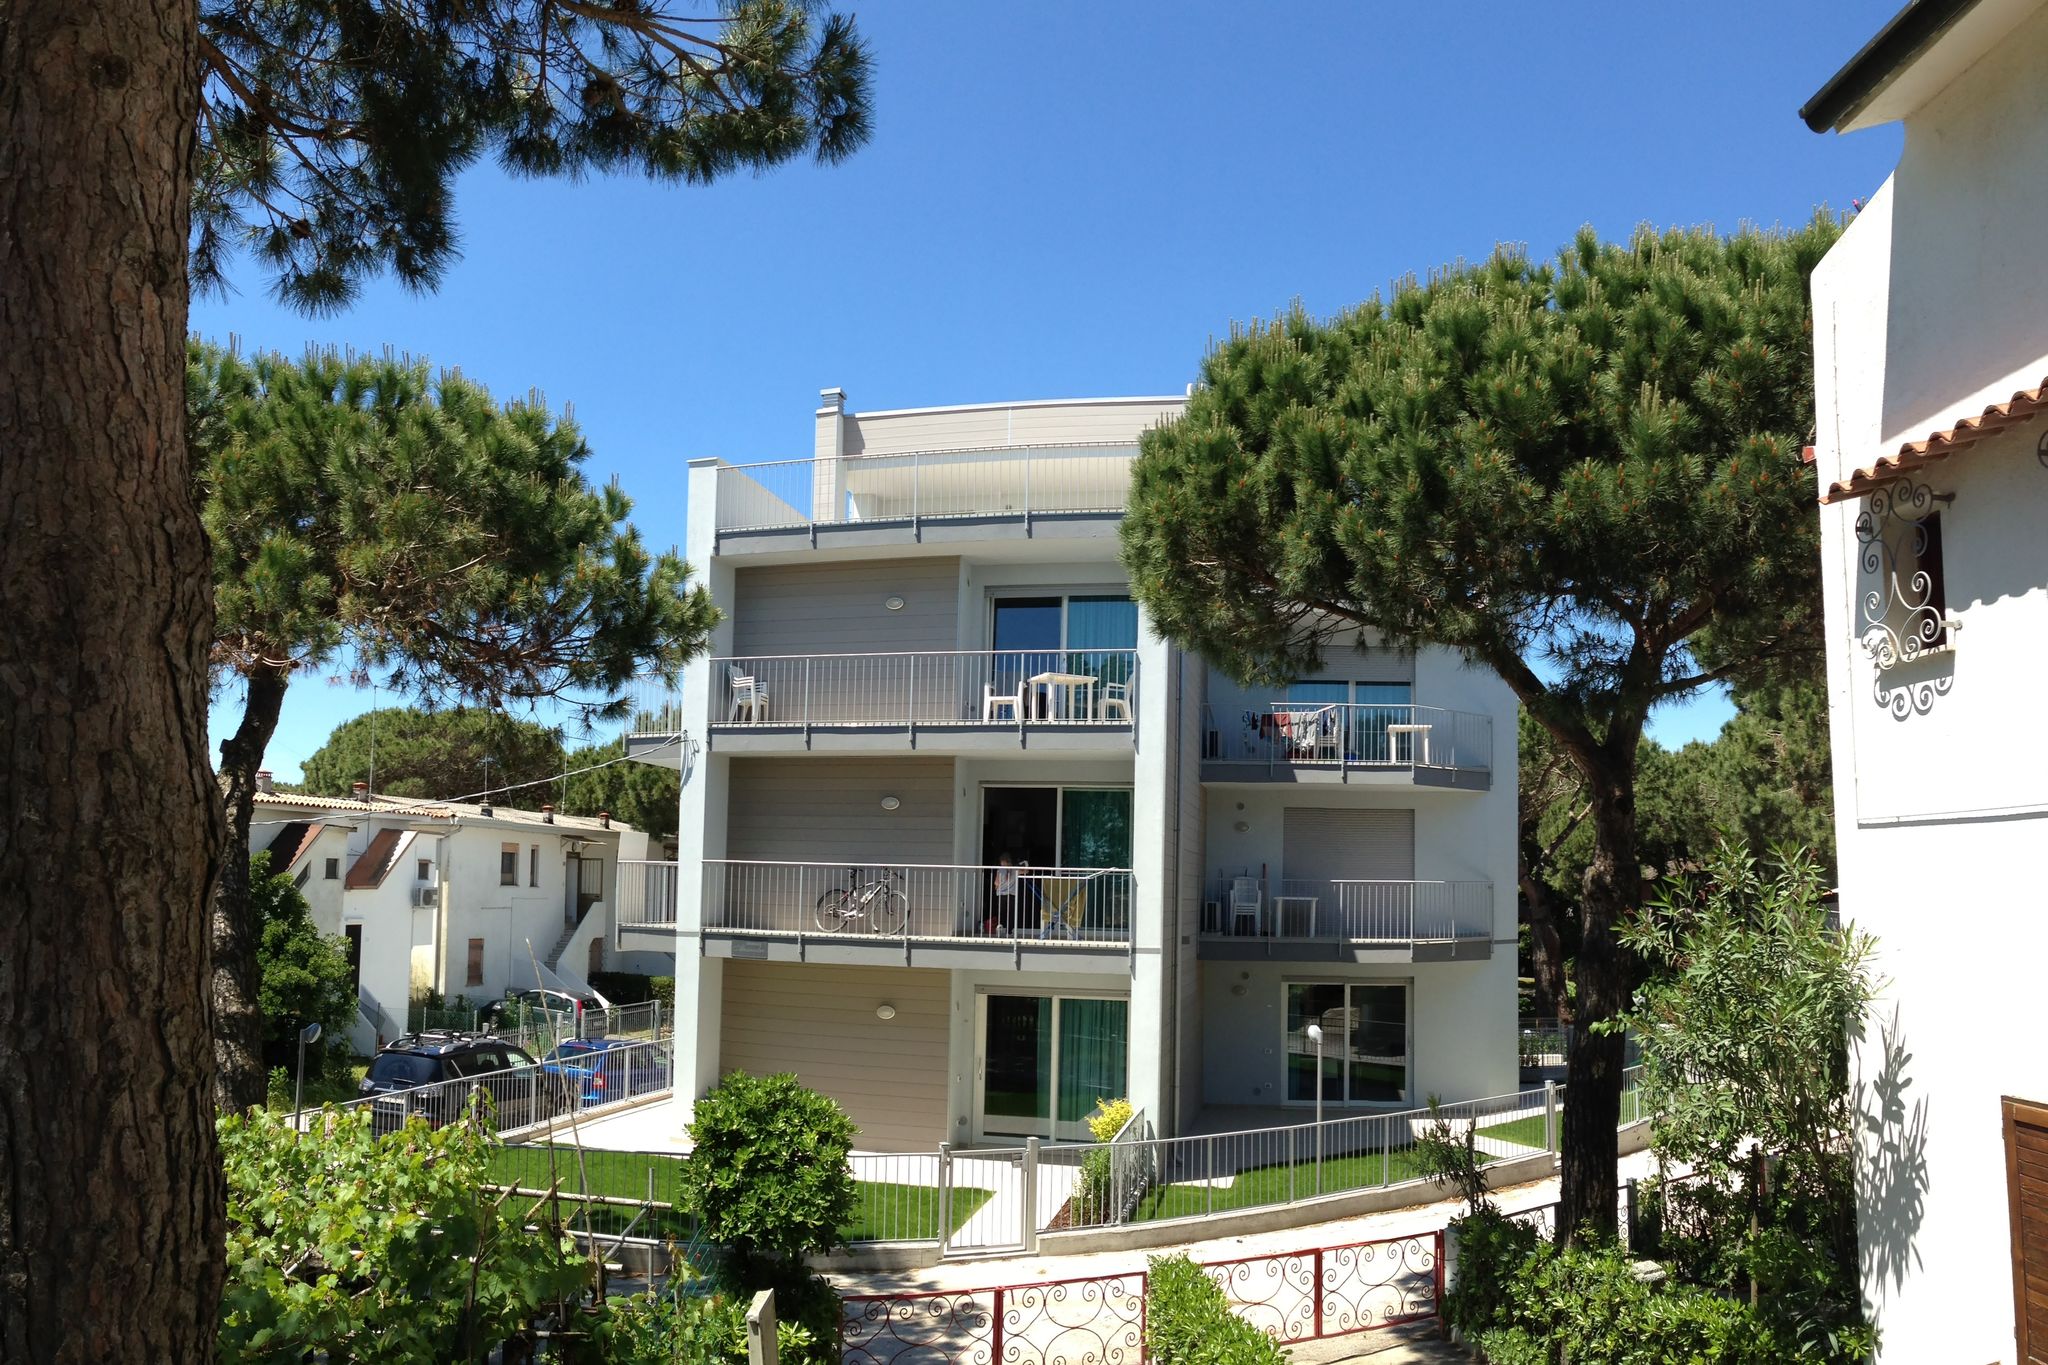 Modern holiday home close to sea front, in Rosolina Mare, near Venice.